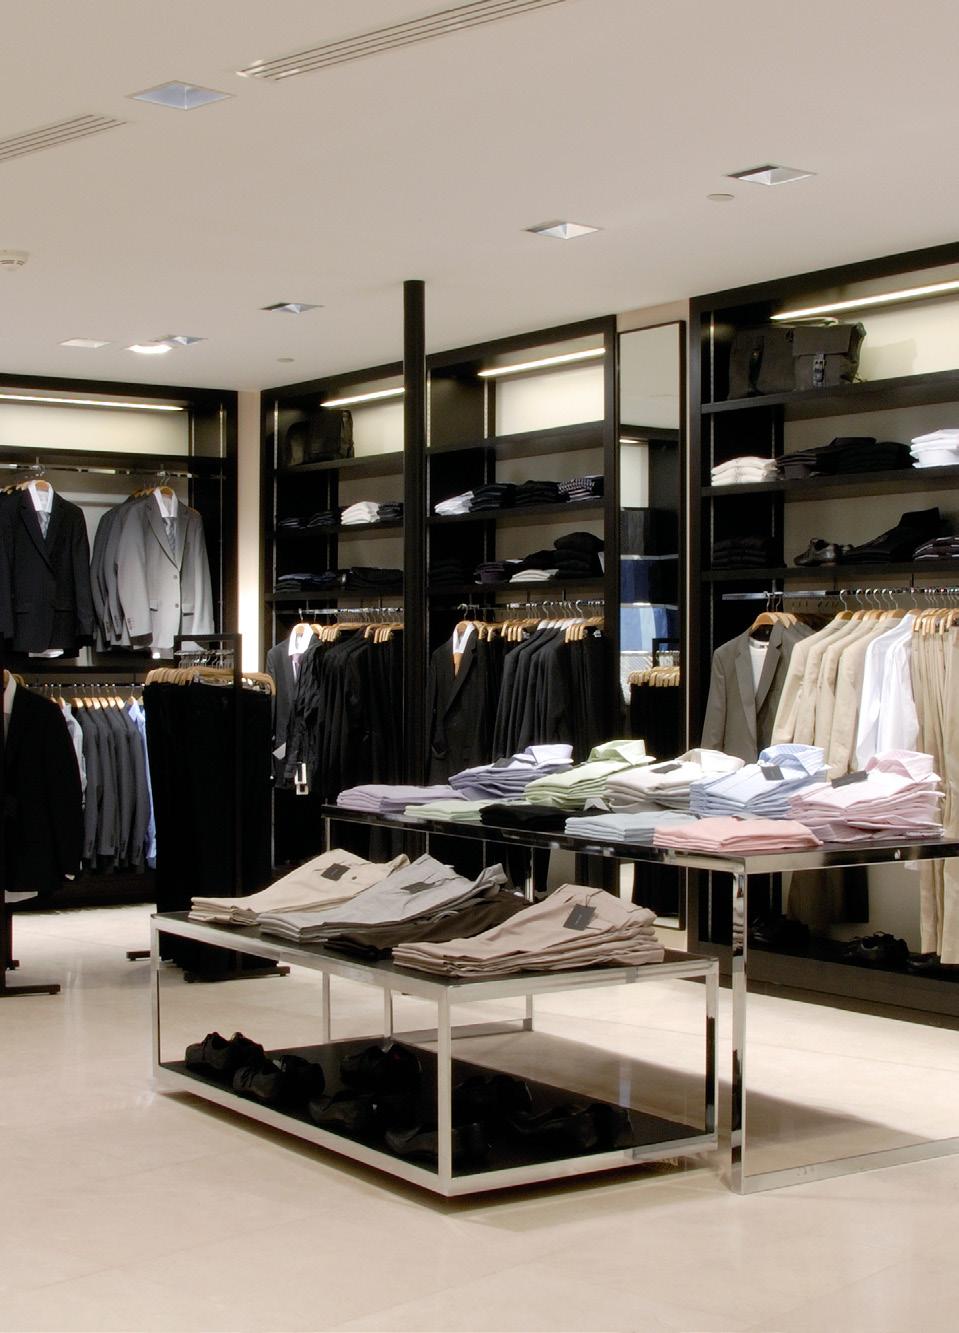 Business Benefits Shows the product image on the interactive mirror Suggests related clothing items and accessories Provides valuable data on what s being tried on or left behind Zara Leading apparel